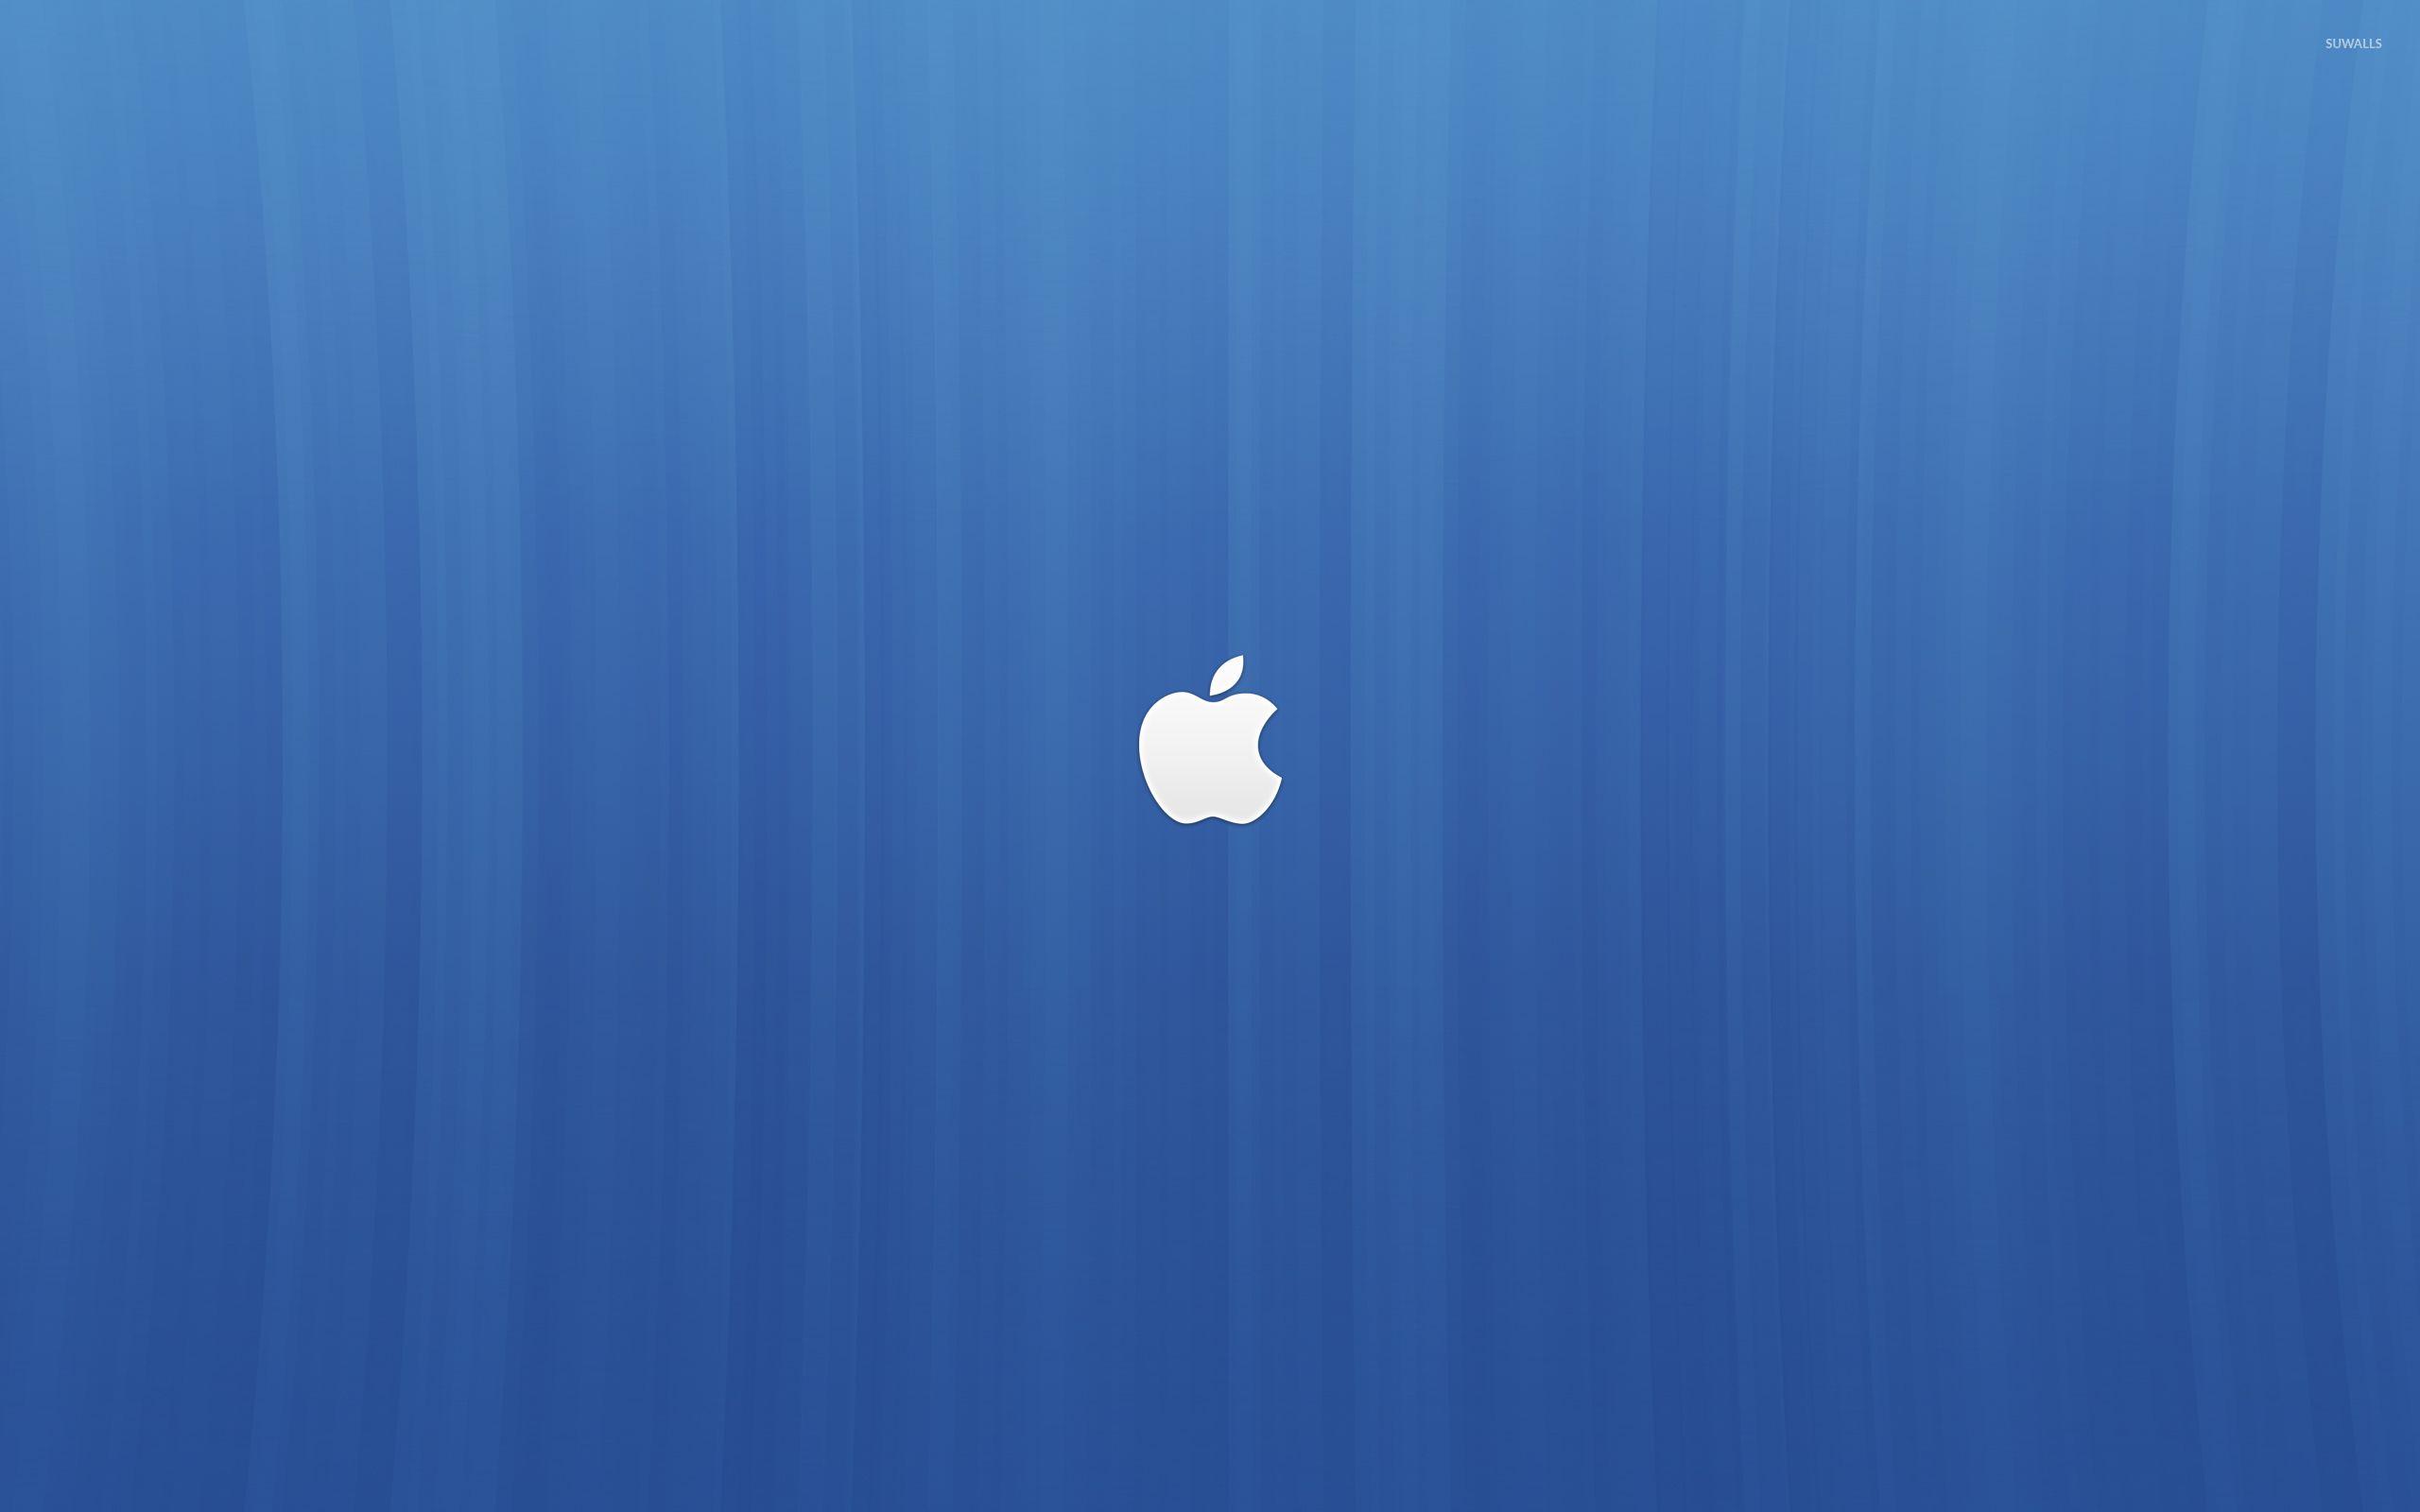 White with Blue Lines Logo - White Apple logo on blue lines wallpaper - Computer wallpapers - #54107